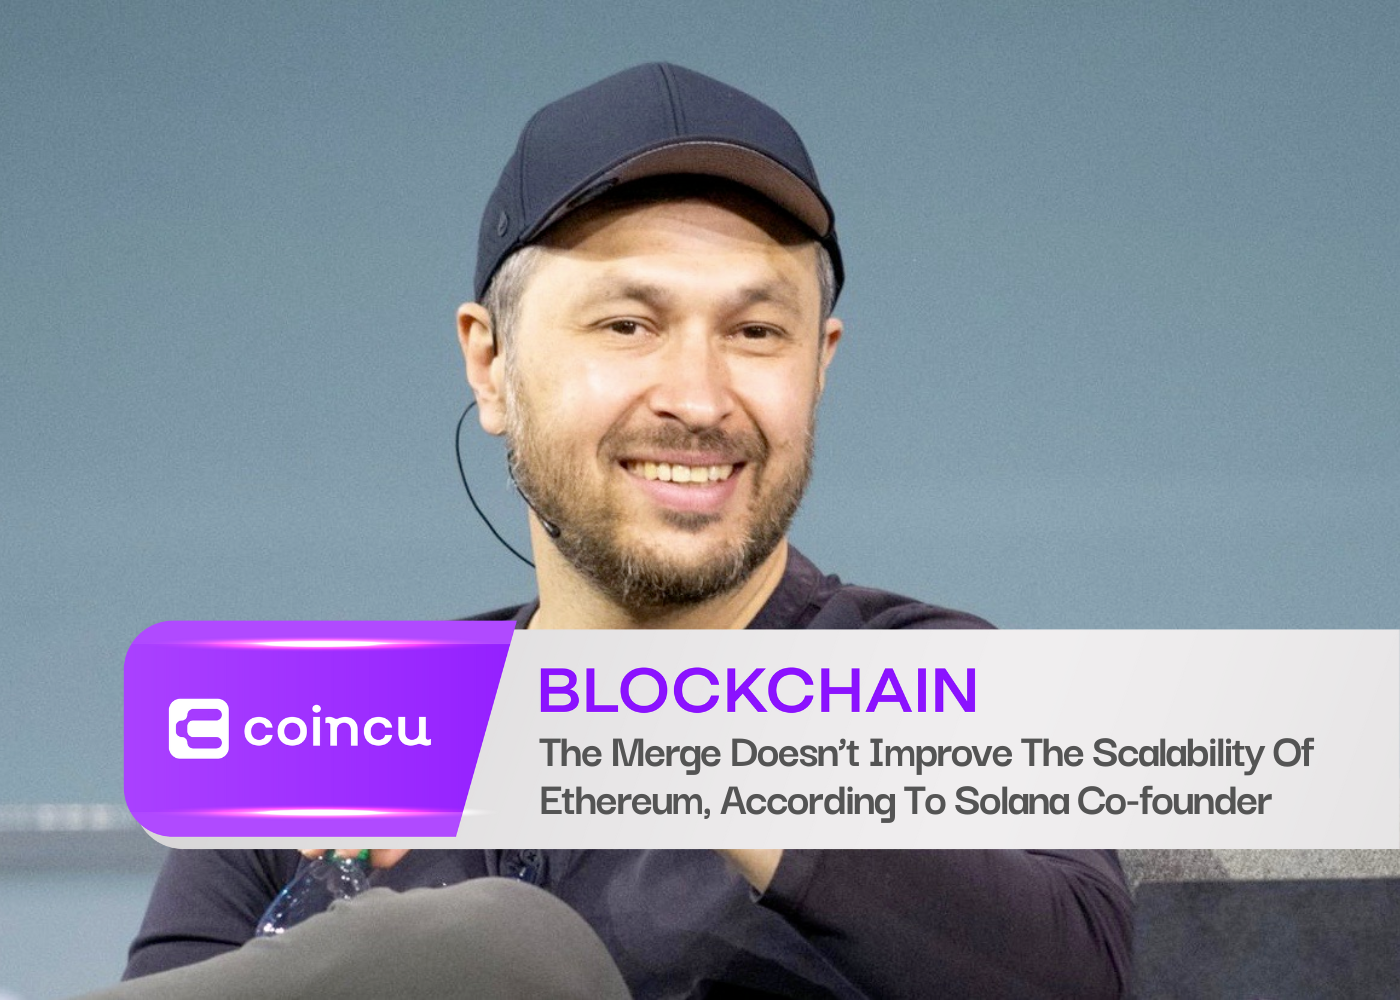 The Merge Doesn’t Improve The Scalability Of Ethereum, According To Solana Co-founder